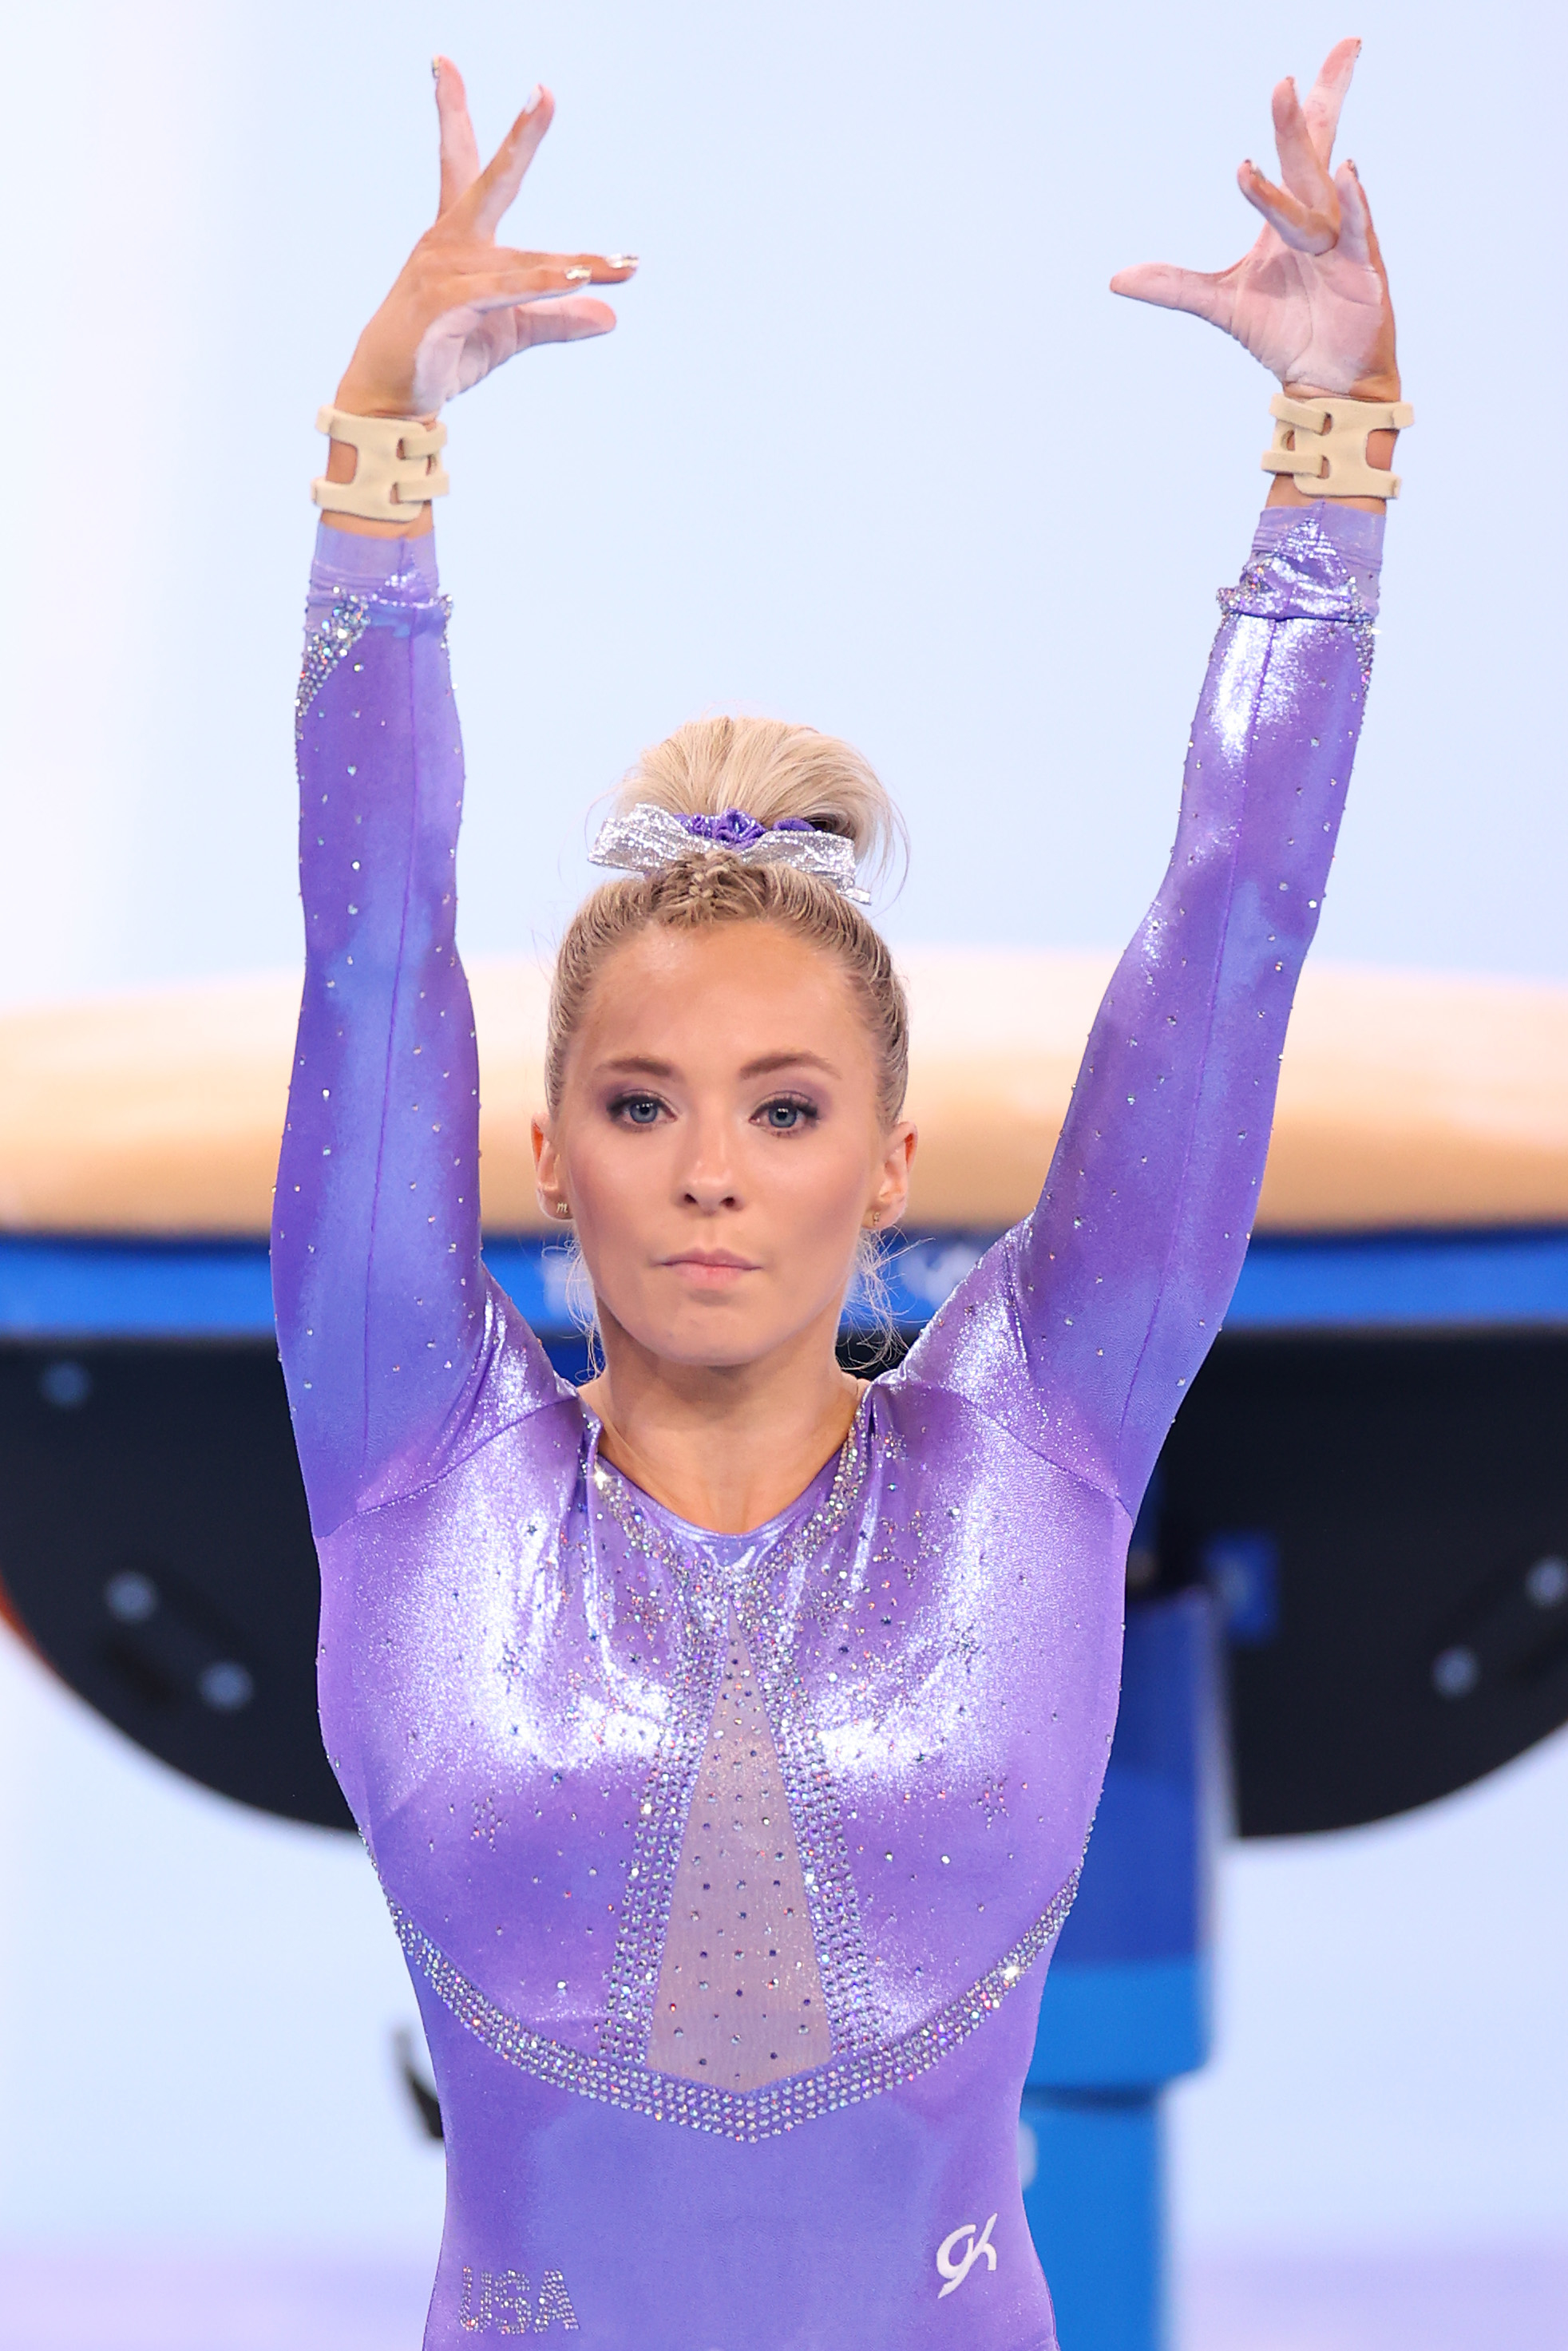 MyKayla Skinner is seen in a sparkly gymnastics leotard with arms raised, preparing for a routine